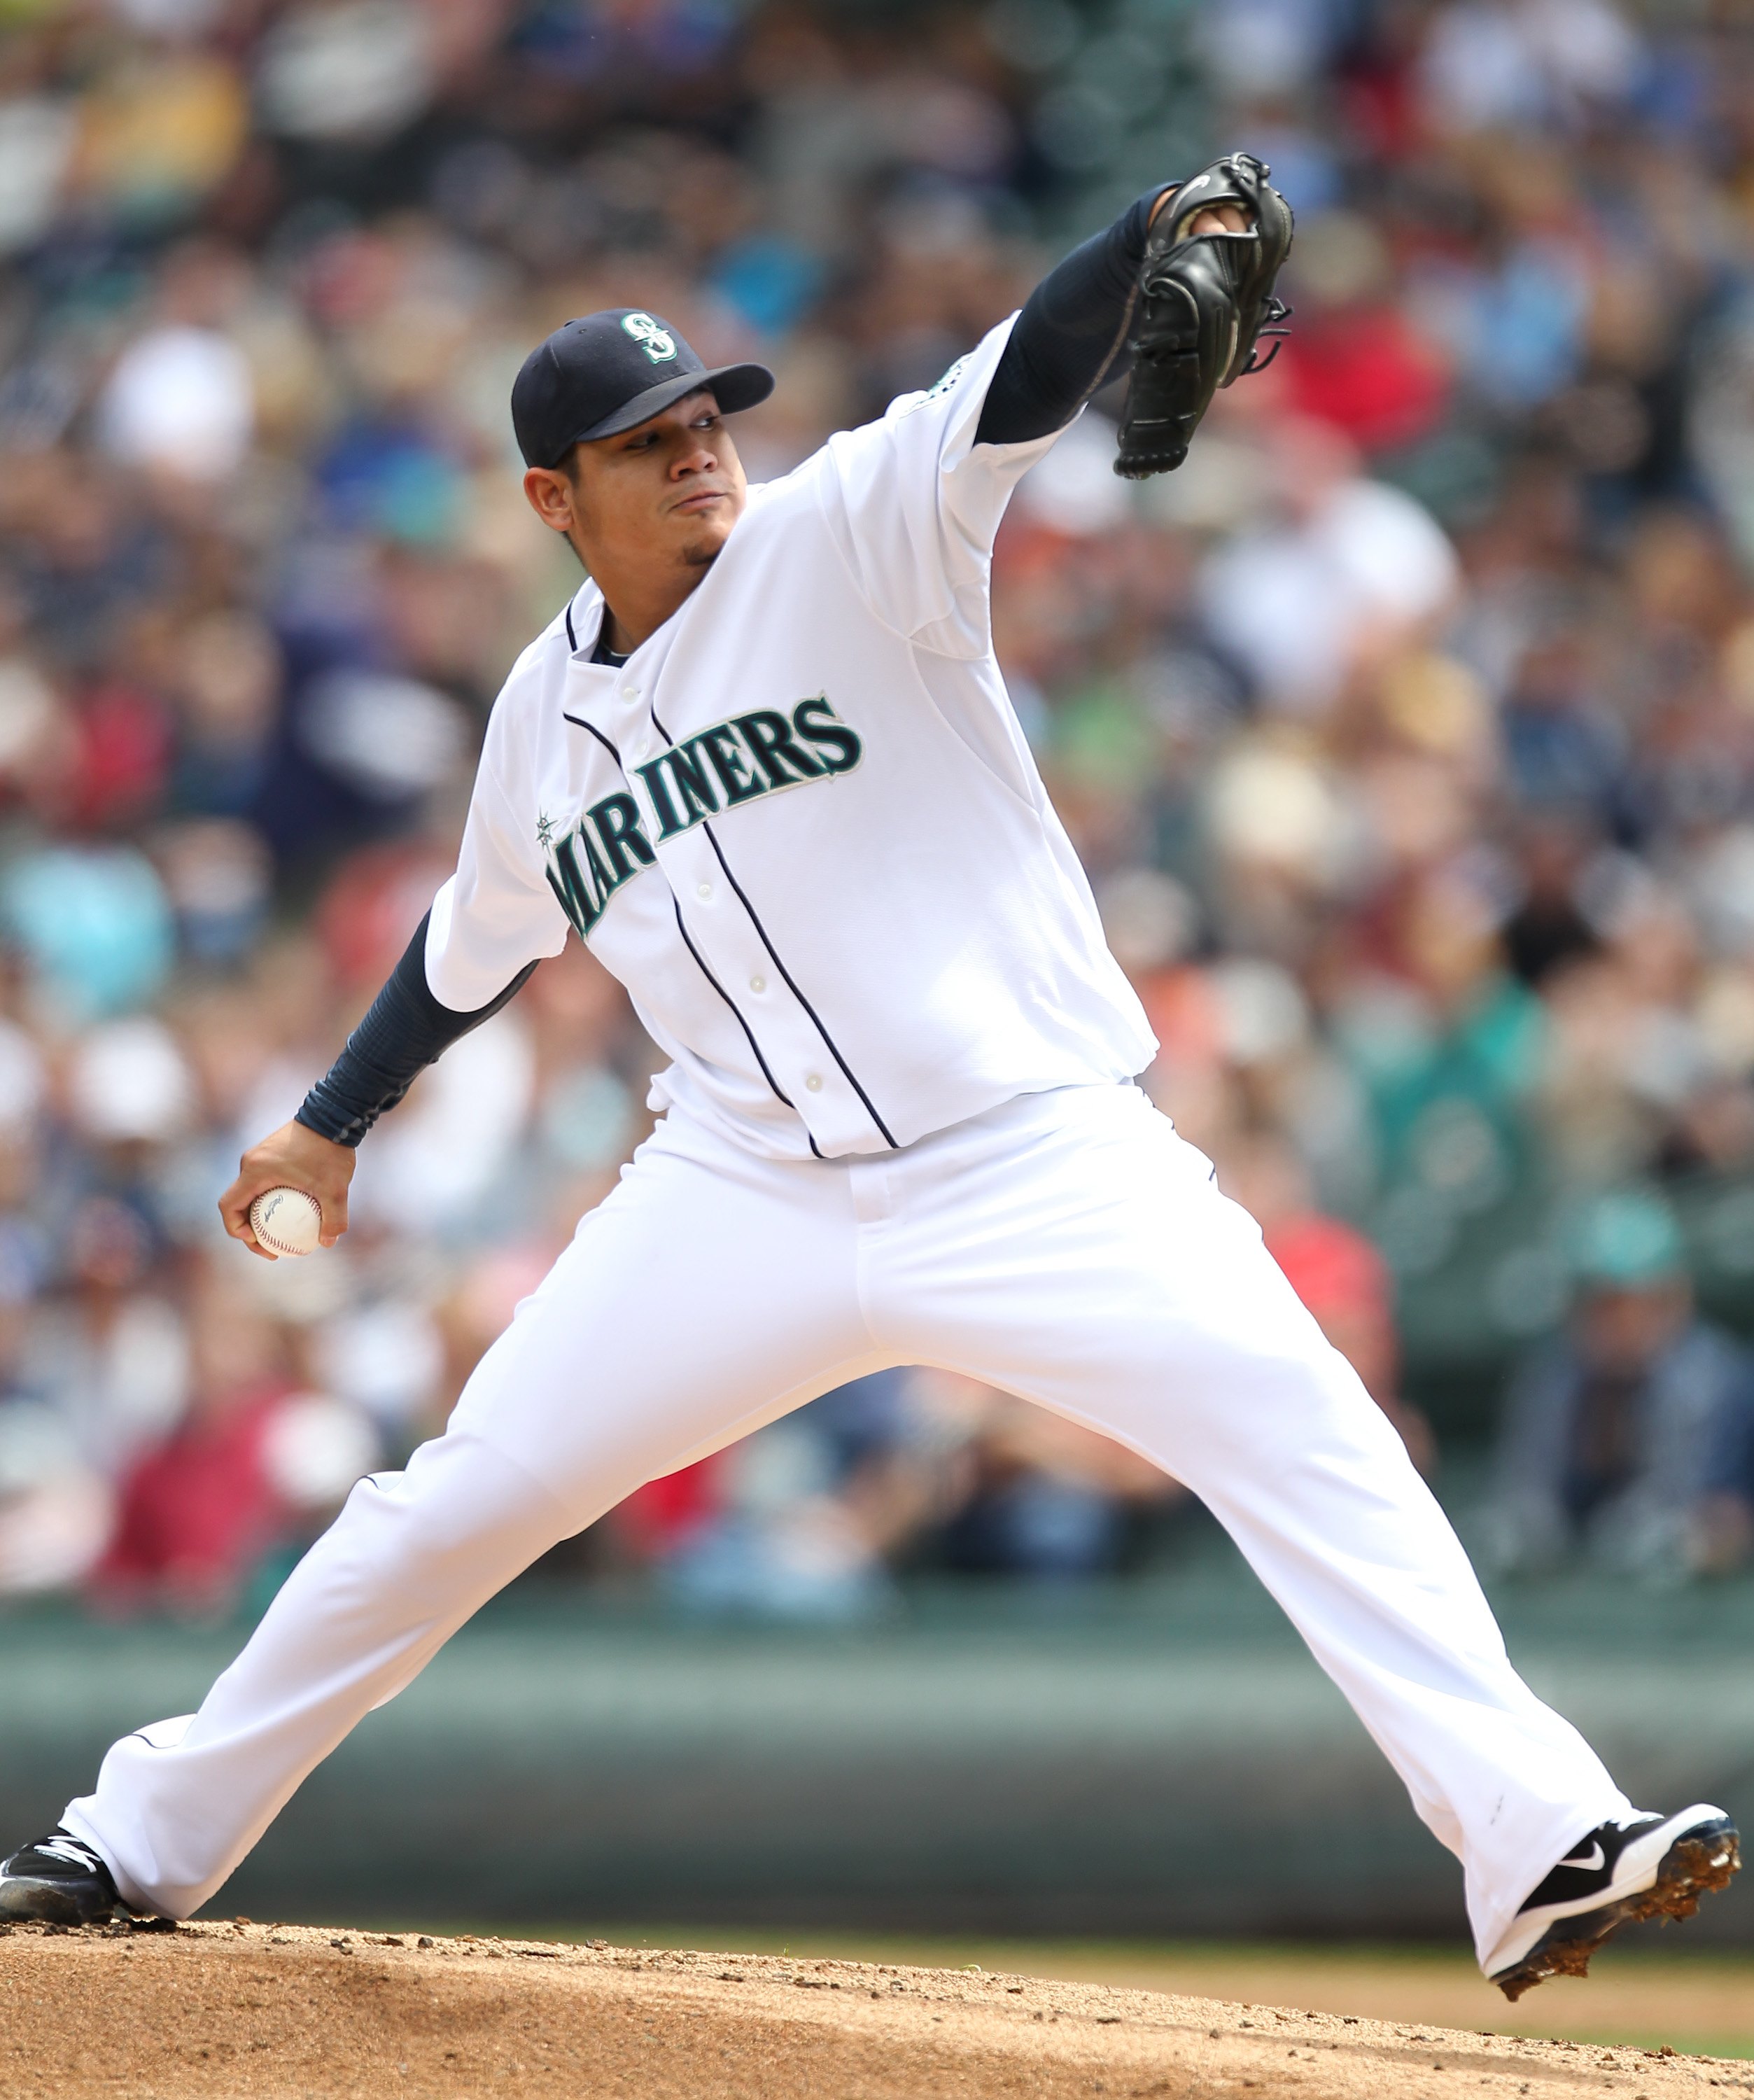 SEATTLE - MAY 23:  Starting pitcher Felix Hernandez #34 of the Seattle Mariners pitches against the San Diego Padres at Safeco Field on May 23, 2010 in Seattle, Washington. (Photo by Otto Greule Jr/Getty Images)